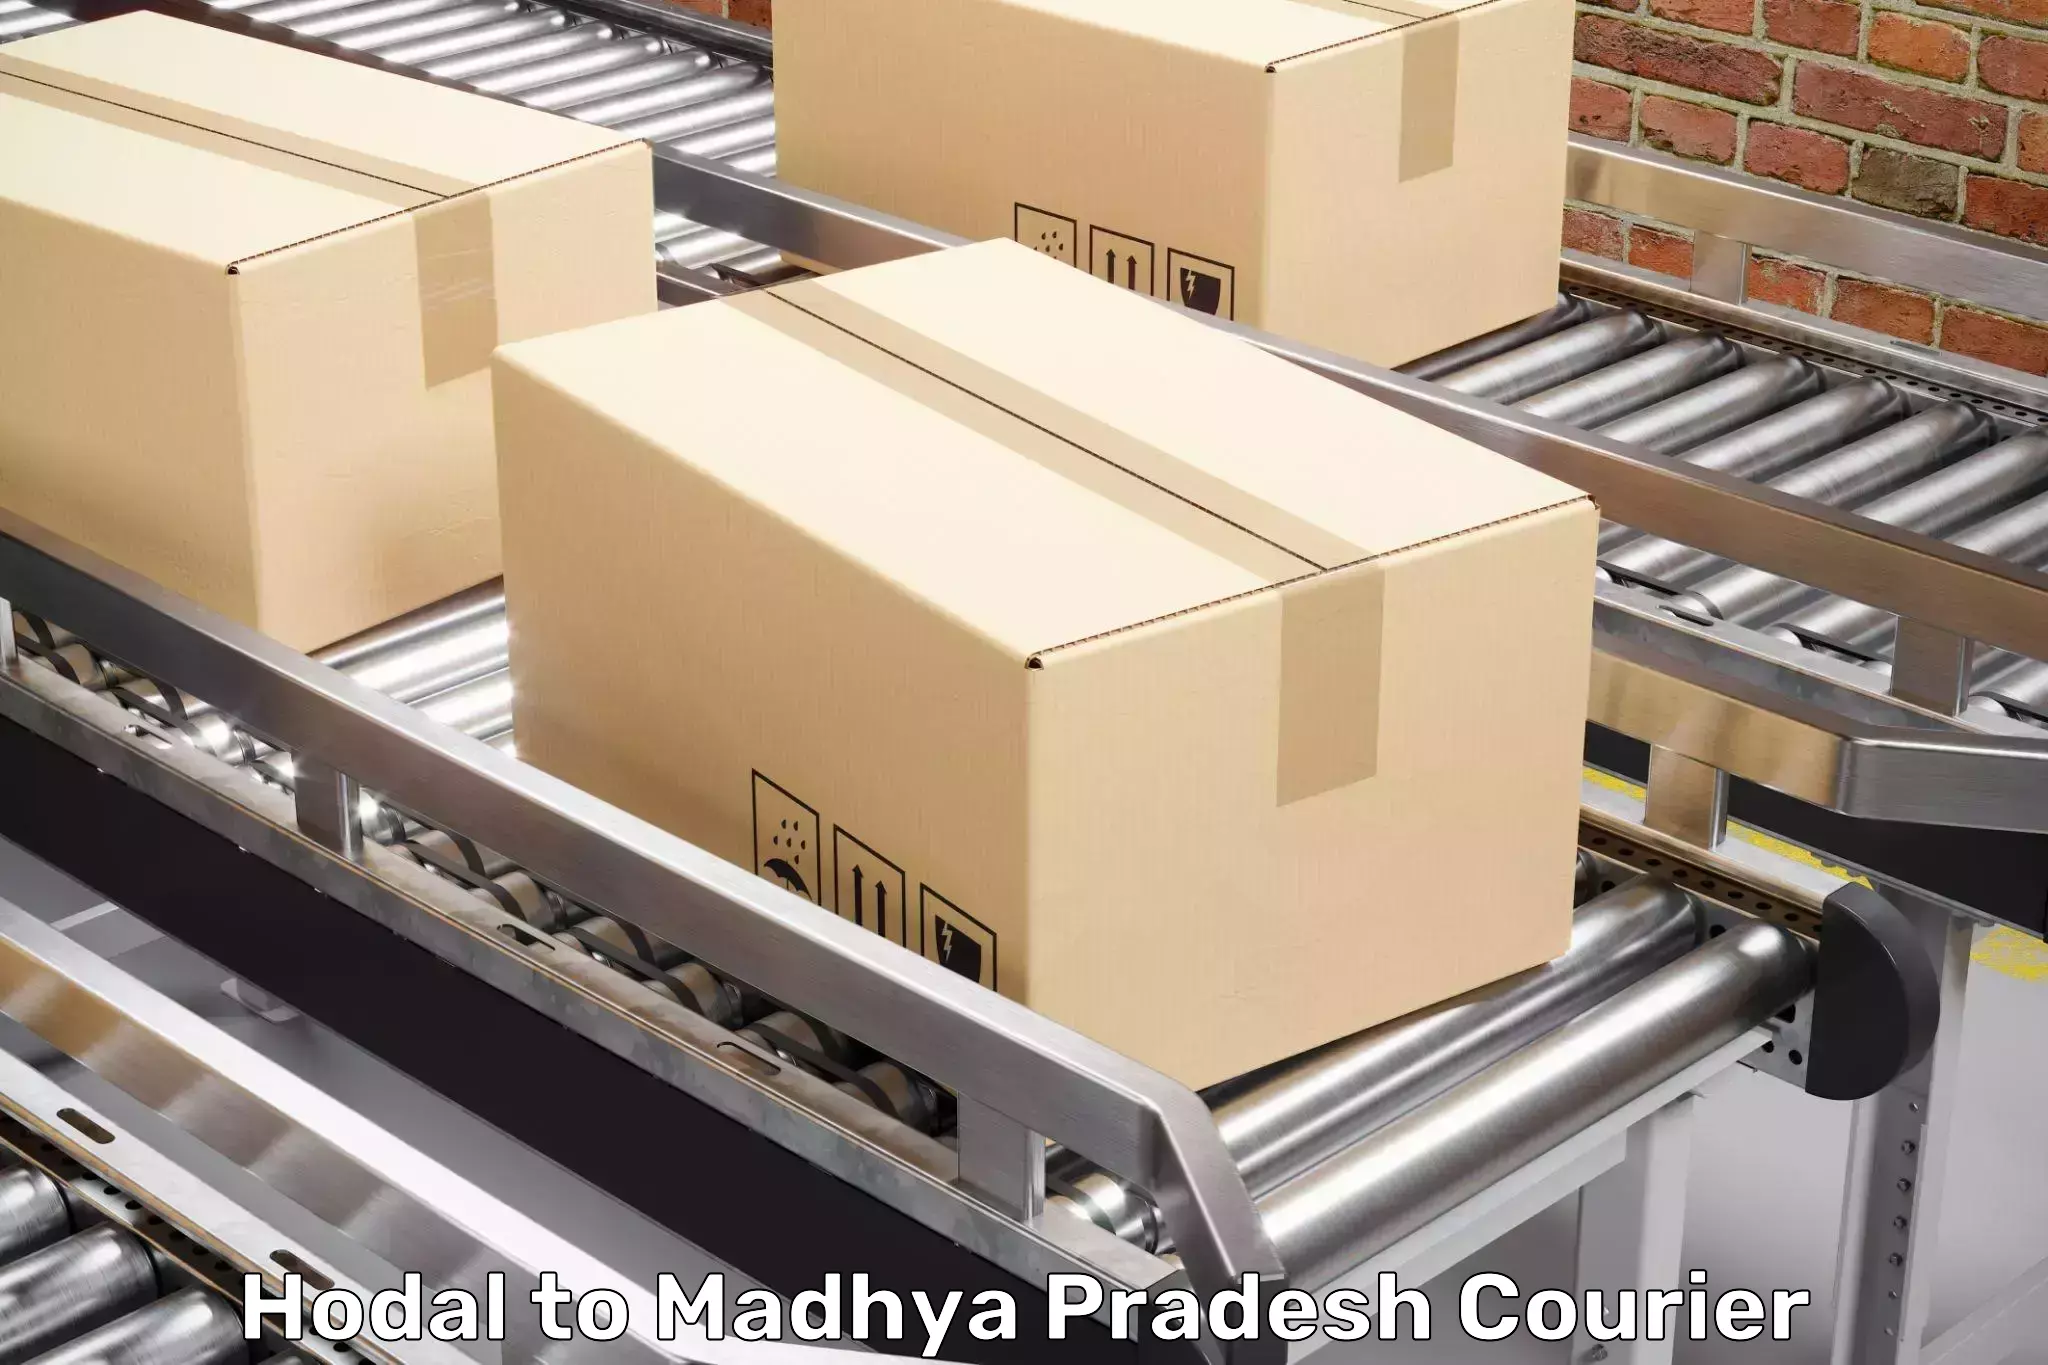 Seamless moving process Hodal to Madwas